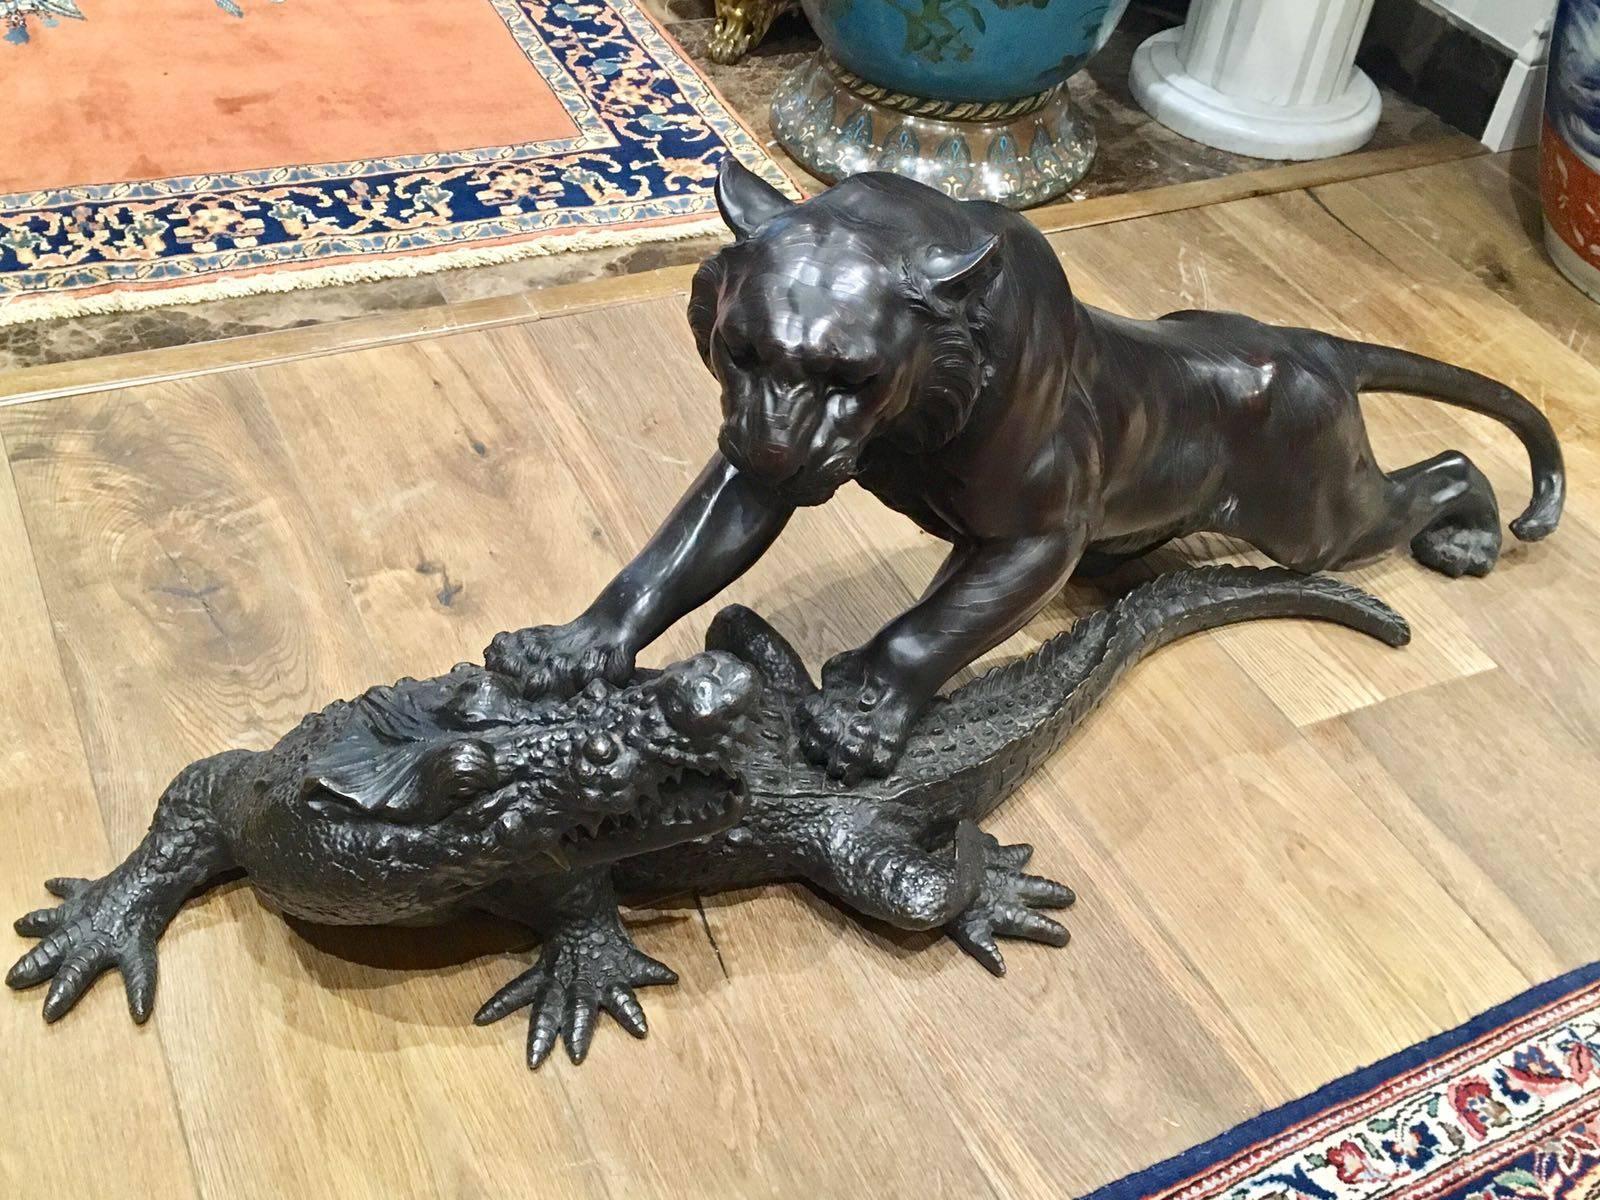 19th century, Meiji period, Japanese bronze sculpture of a tiger and crocodile. 

When the two pieces are fitted together they measure 44 cm in height and 118 cm in length. 

The tiger and crocodile can be separated, and when separated, the